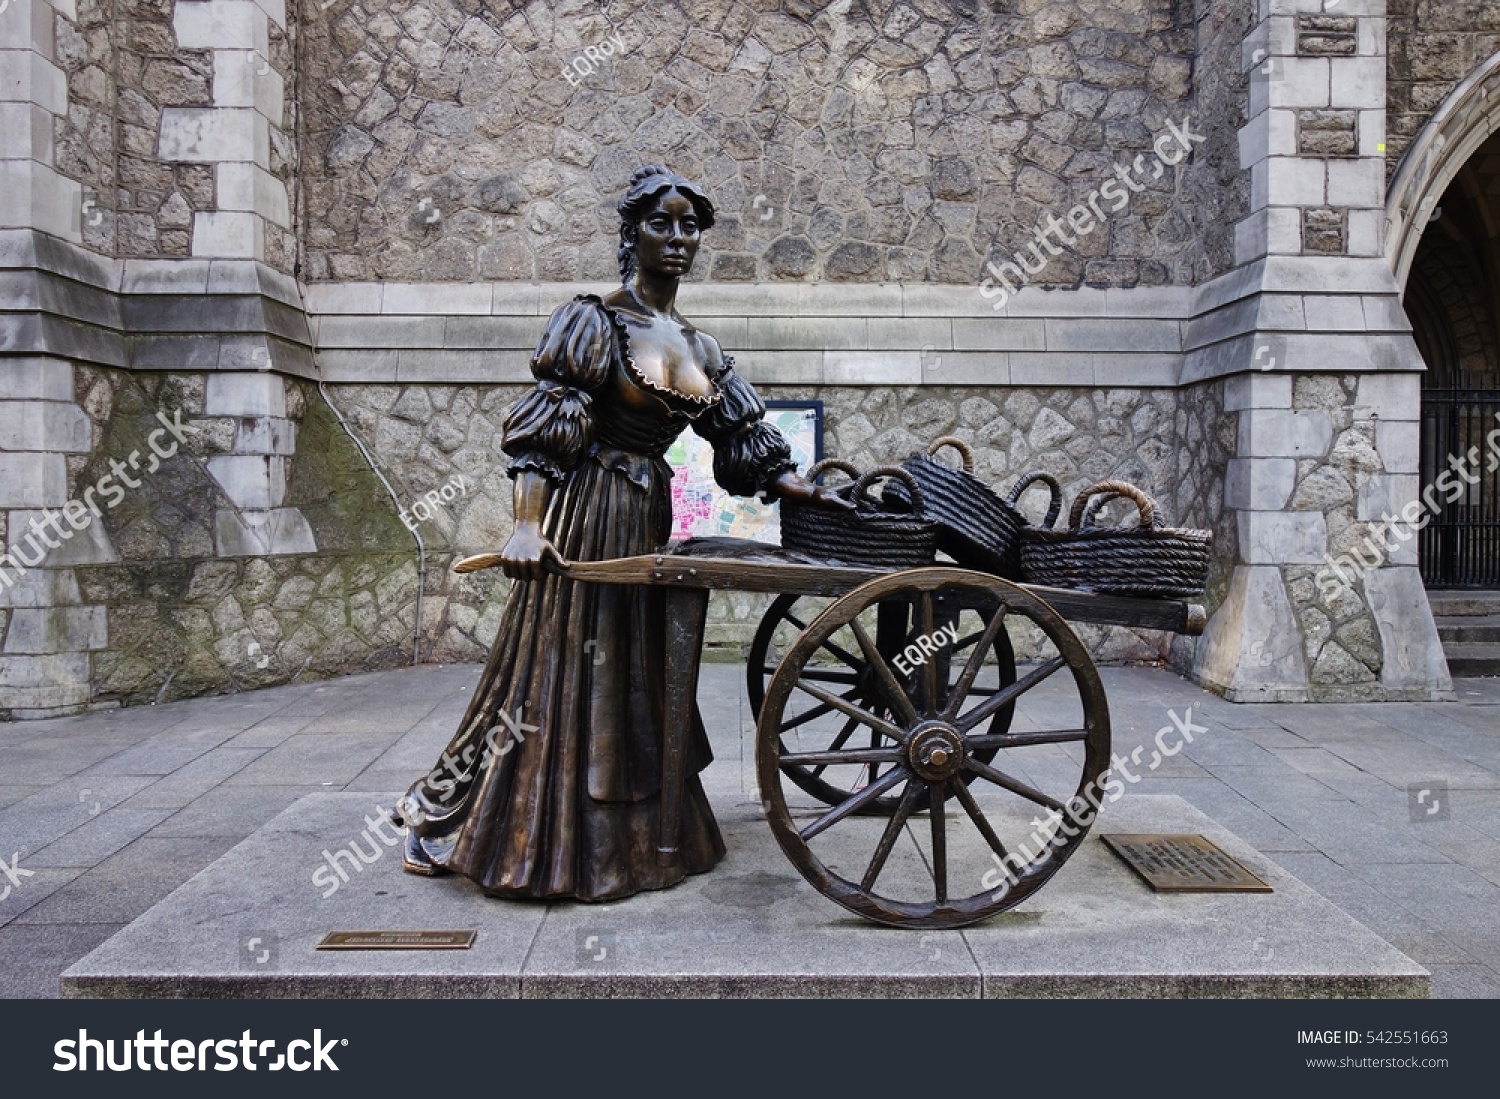 190 Molly Malone Images, Stock Photos & Vectors | Shutterstock